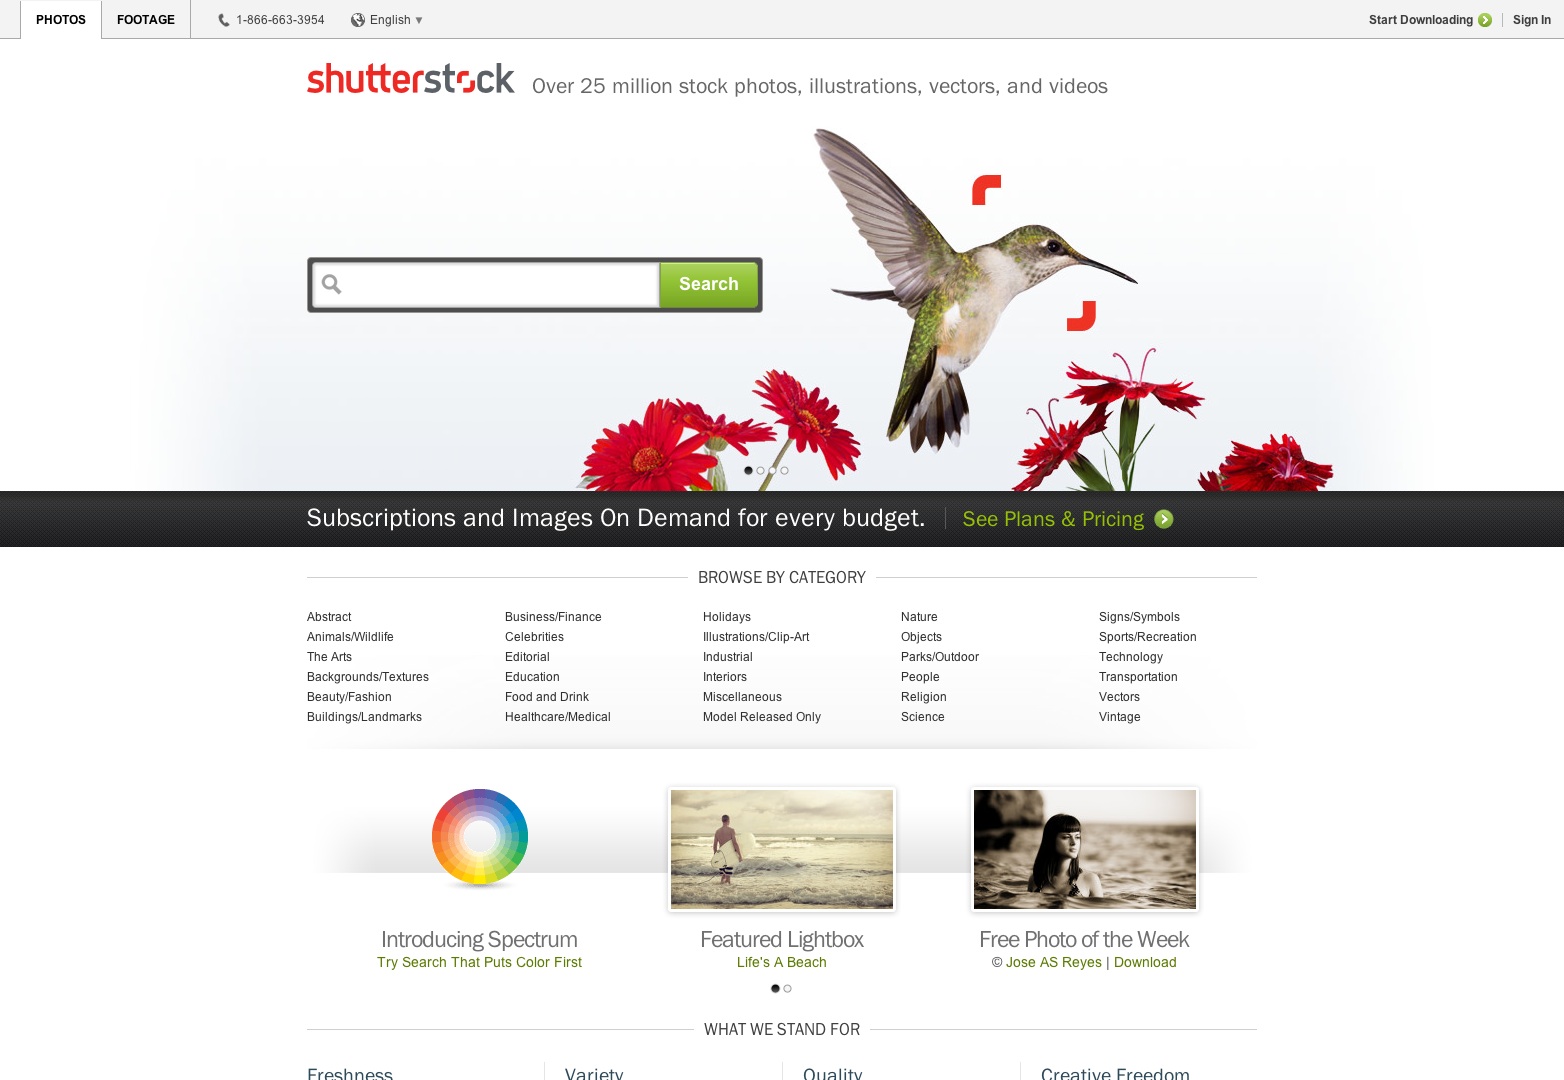 Stock Photos, Royalty-Free Images and Vectors - Shutterstock